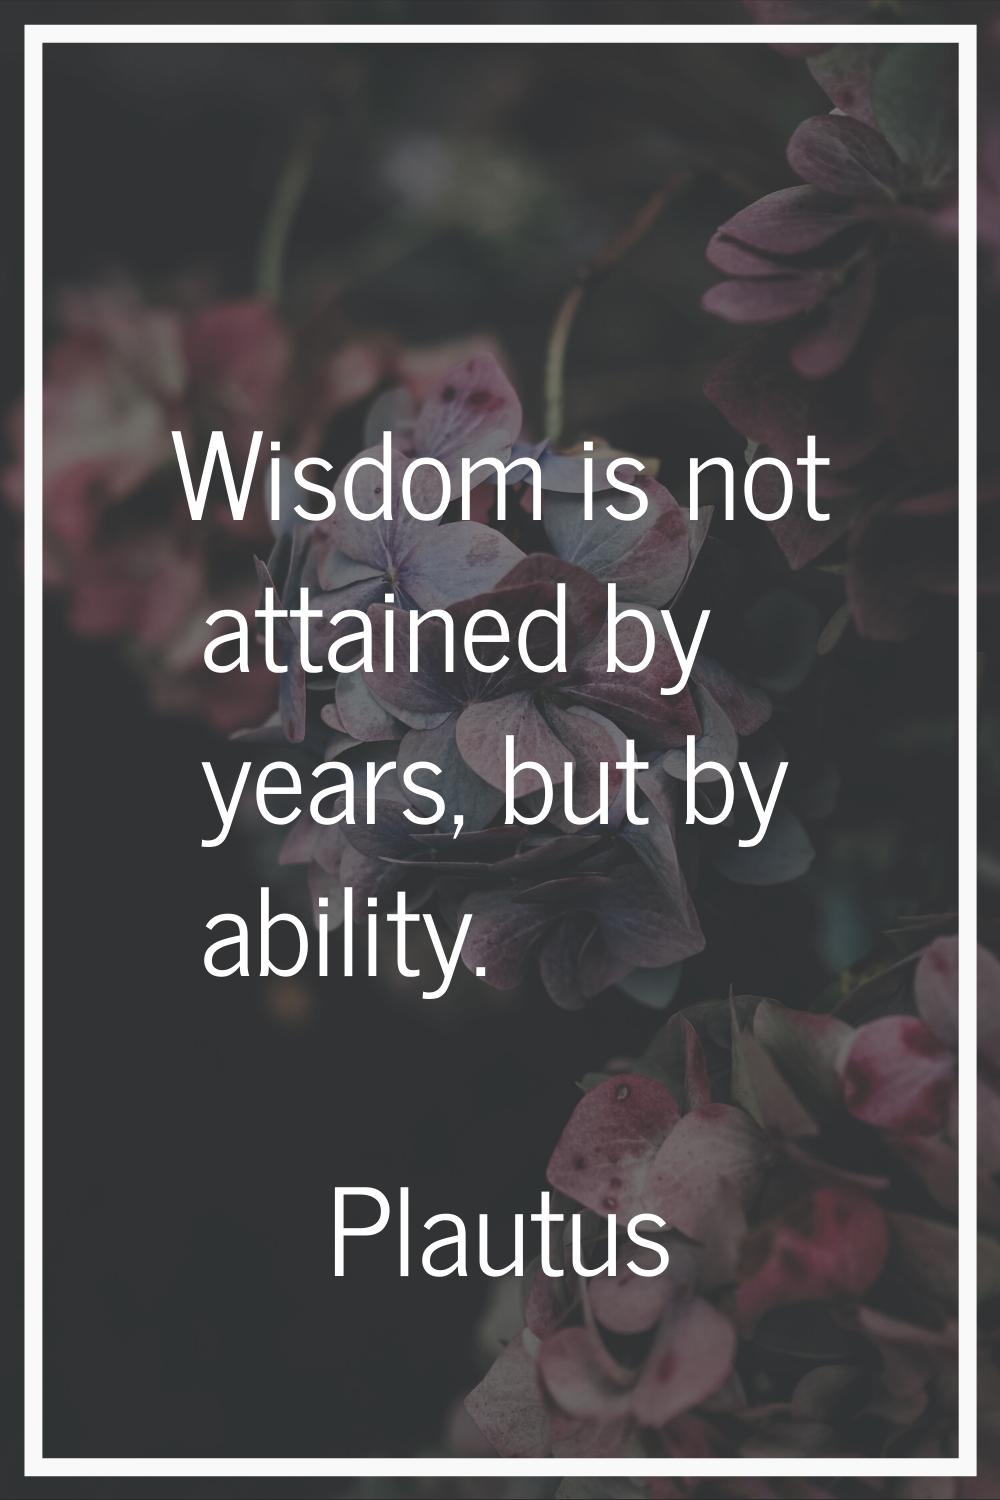 Wisdom is not attained by years, but by ability.